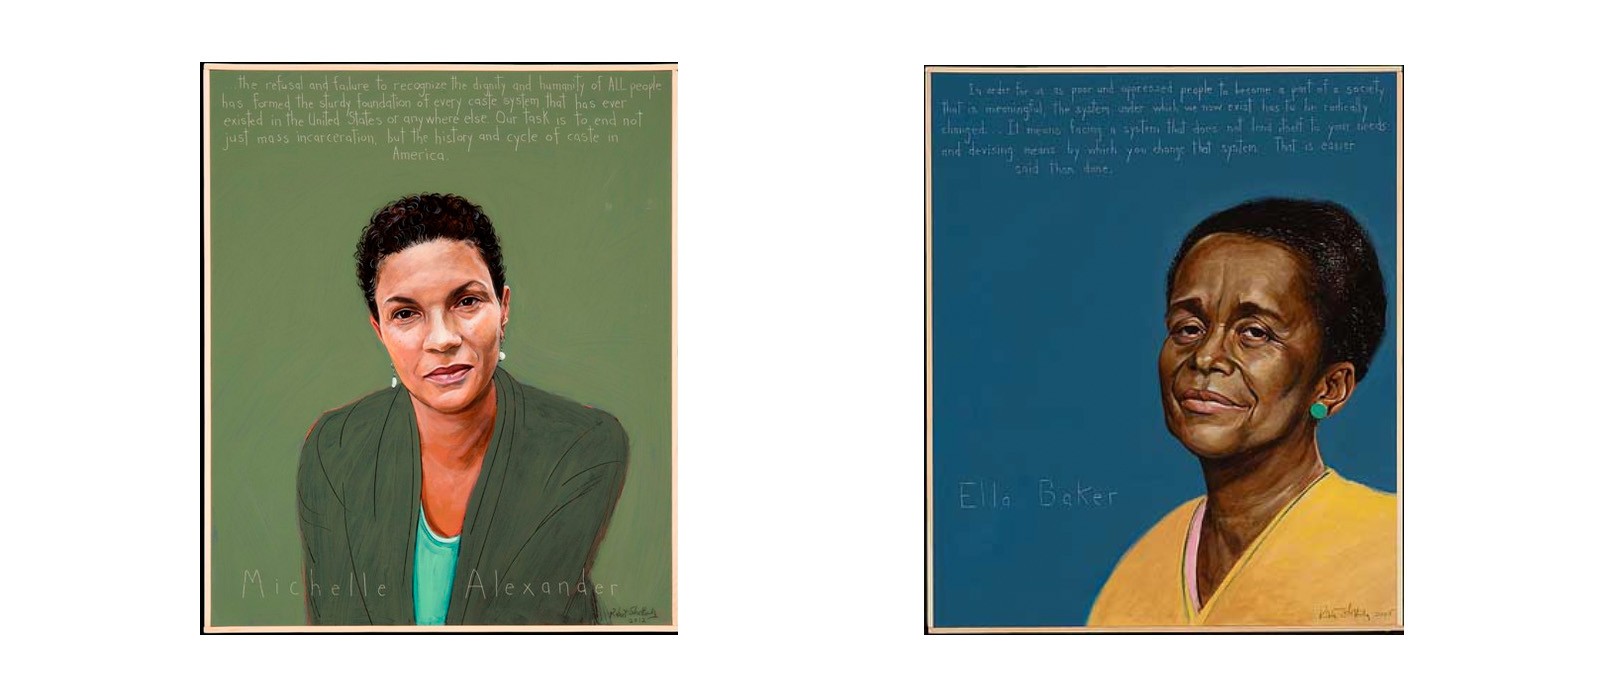 Paintings of Michelle Alexander (left) and Ella Baker (right)